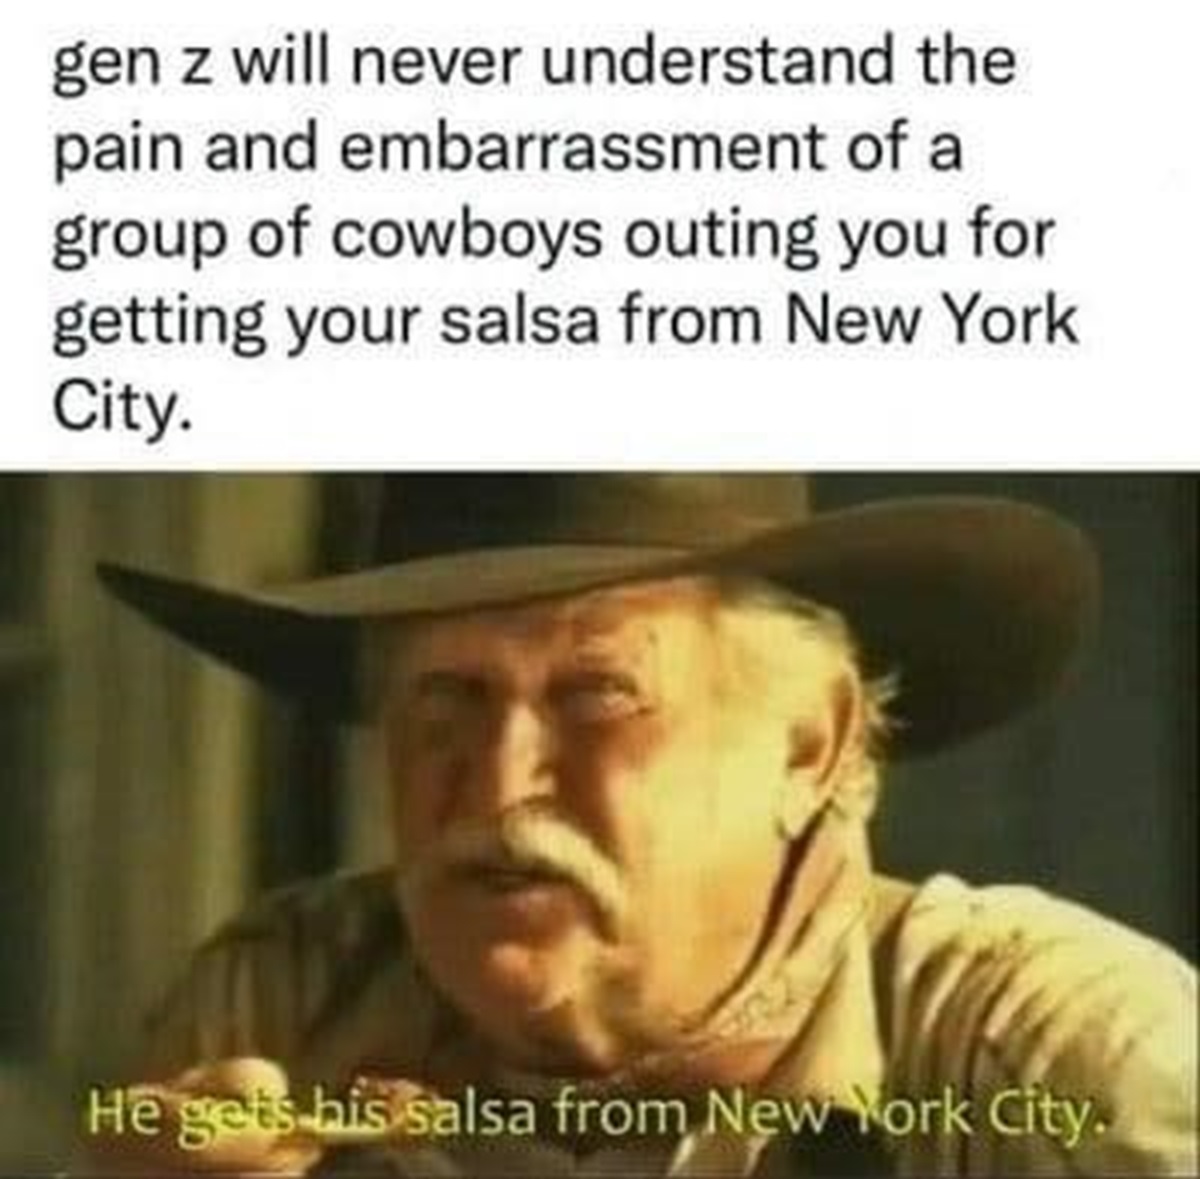 salsa from new york city - gen z will never understand the pain and embarrassment of a group of cowboys outing you for getting your salsa from New York City. He gets his salsa from New York City.